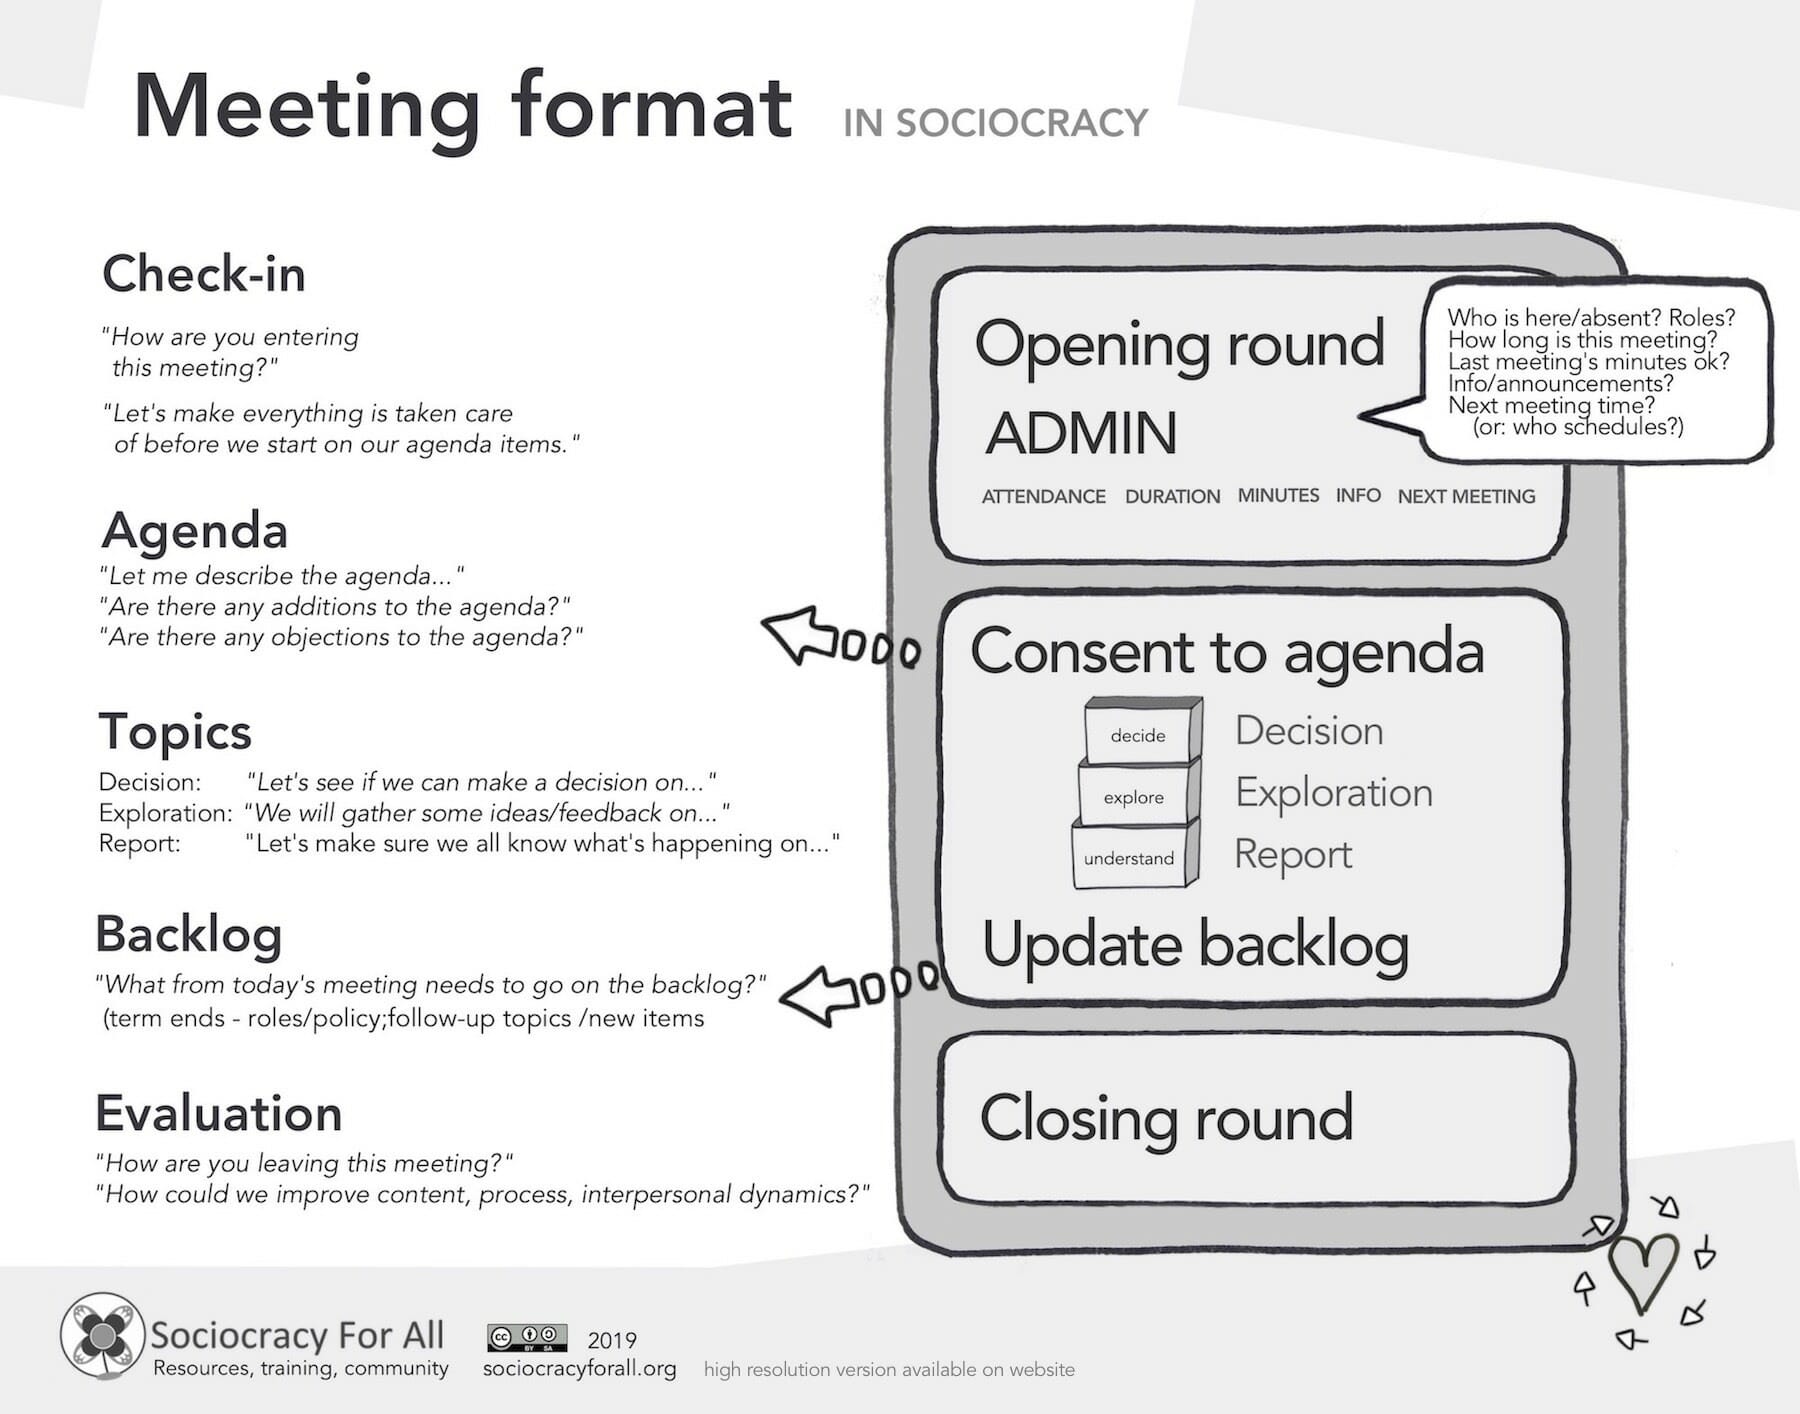 Meeting poster Meeting format low res 2 - - Sociocracy For All